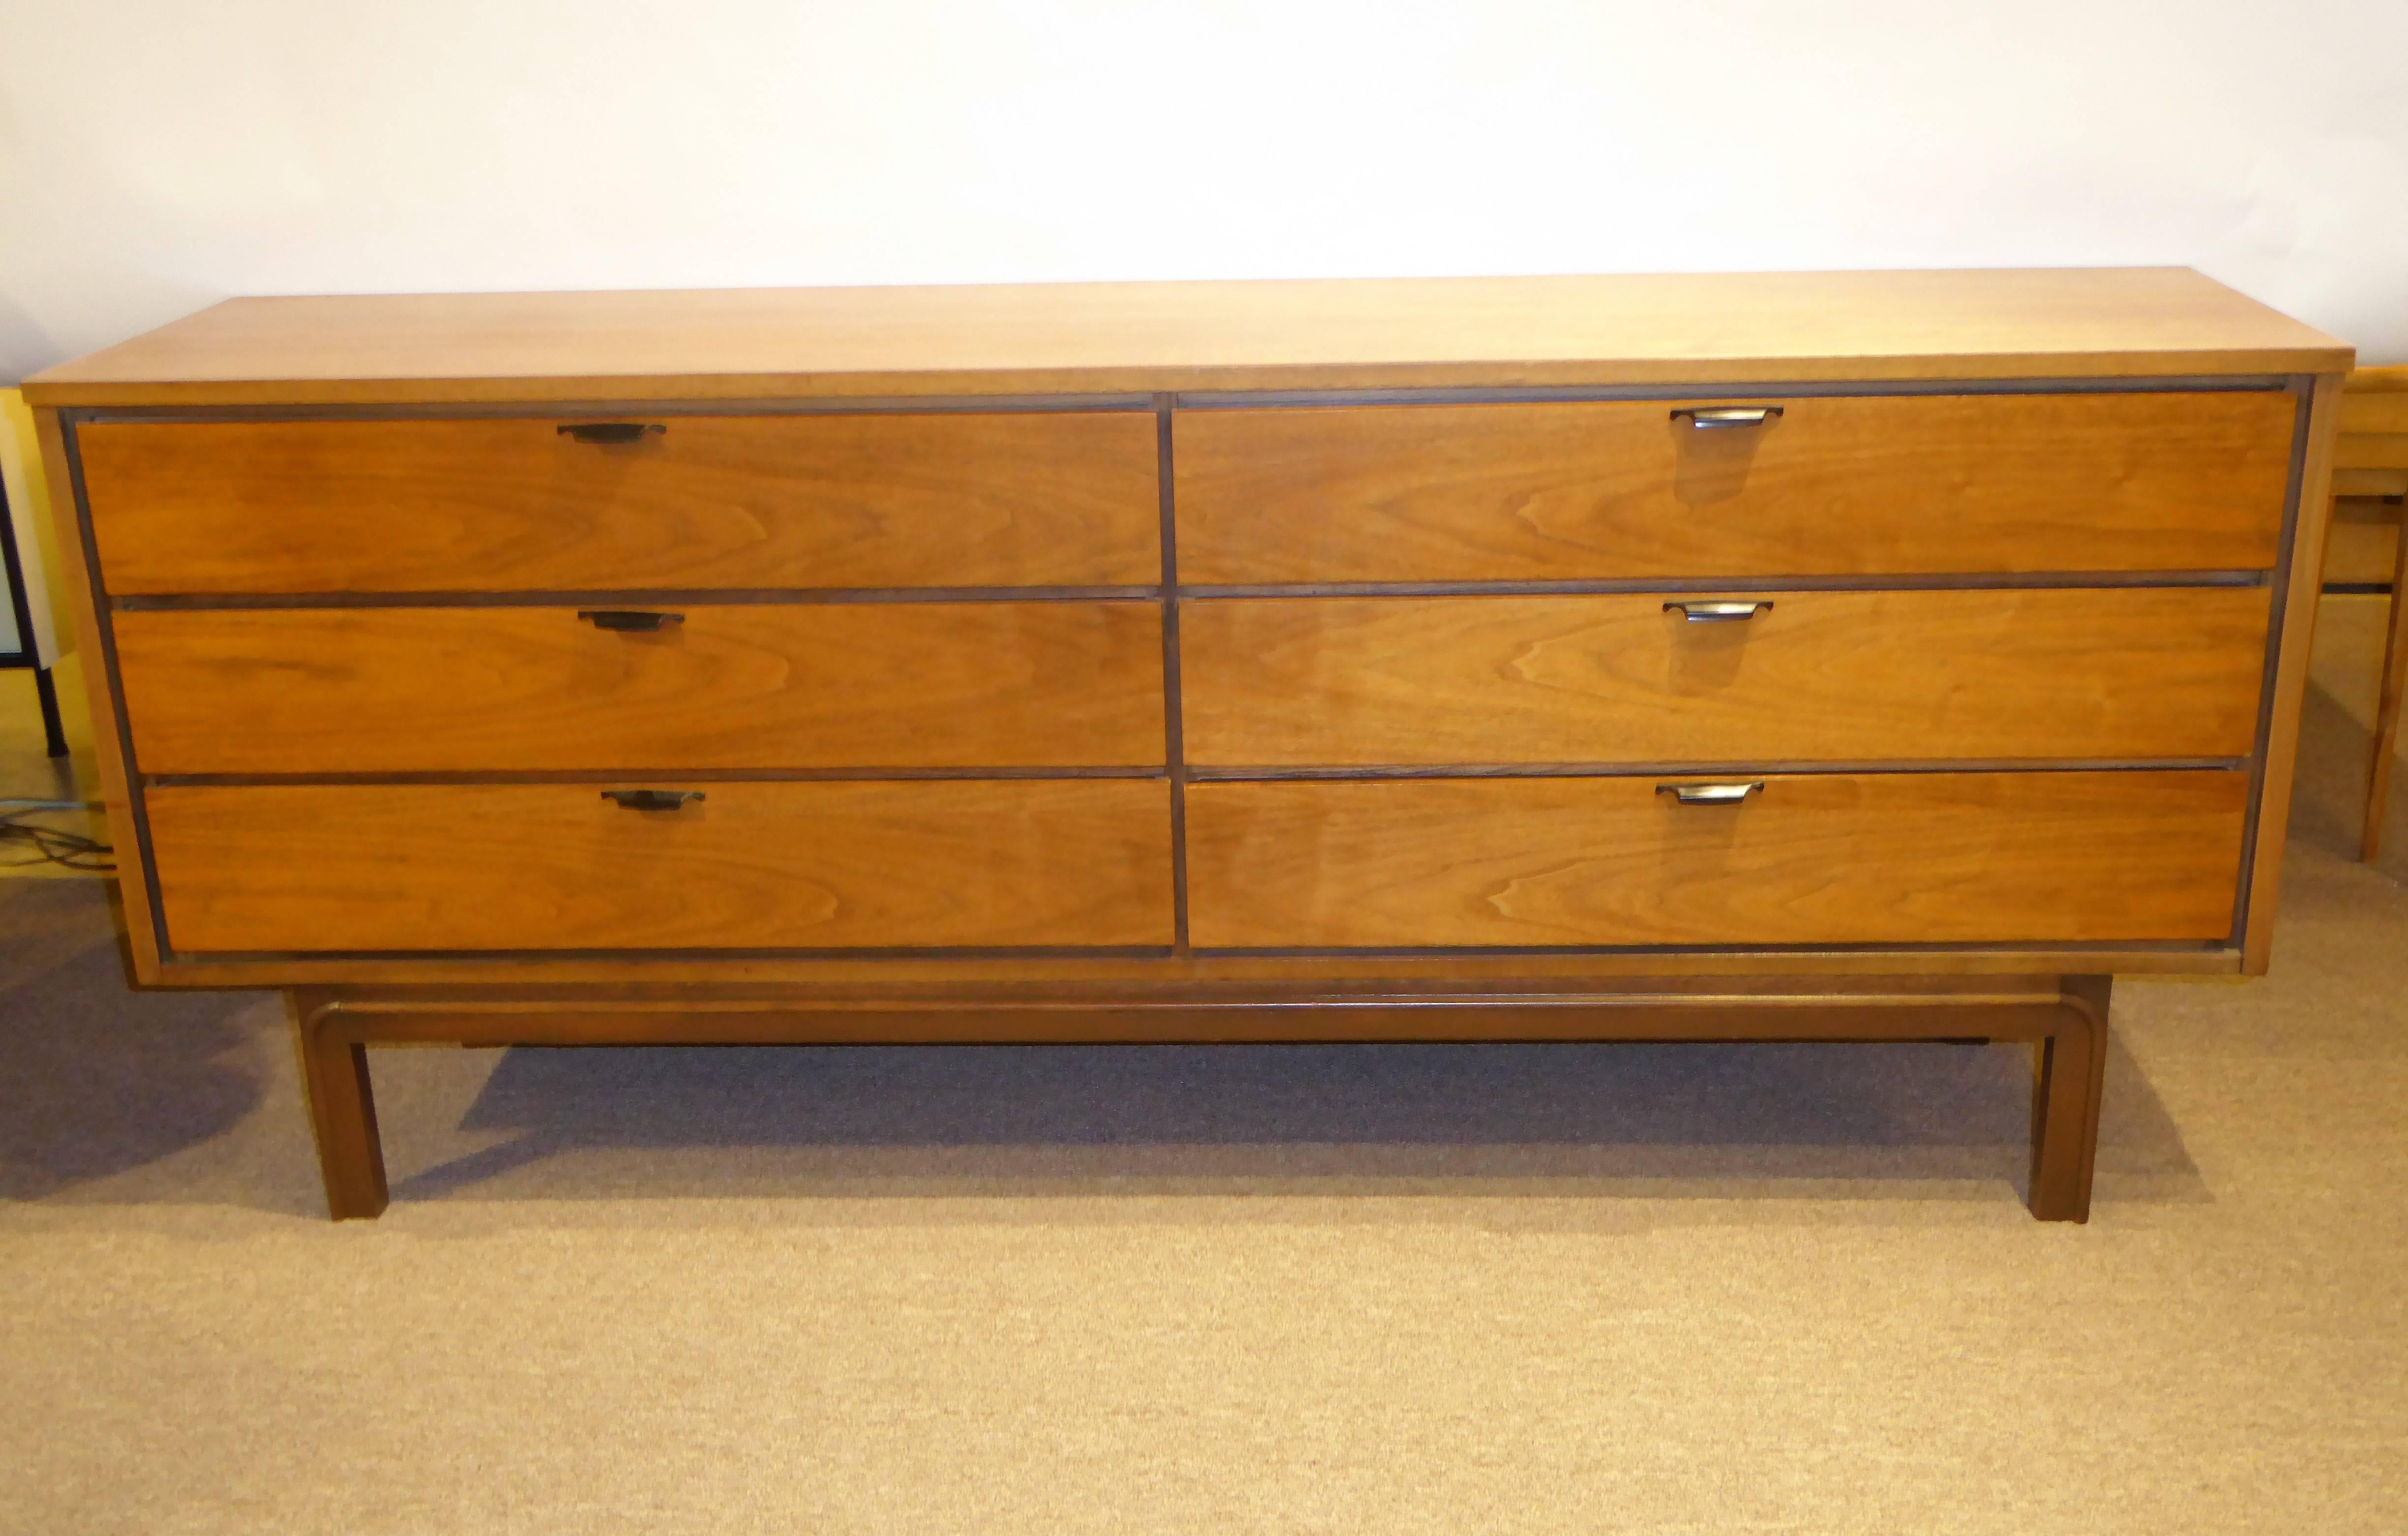 REDUCED FROM $2150....Sleek and modern with minimal accents and crisp, clean lines, this late 1950s walnut six-drawer dresser or credenza has very figured walnut with ebonized drawer surrounds and black drawer pulls. In very nice original condition.